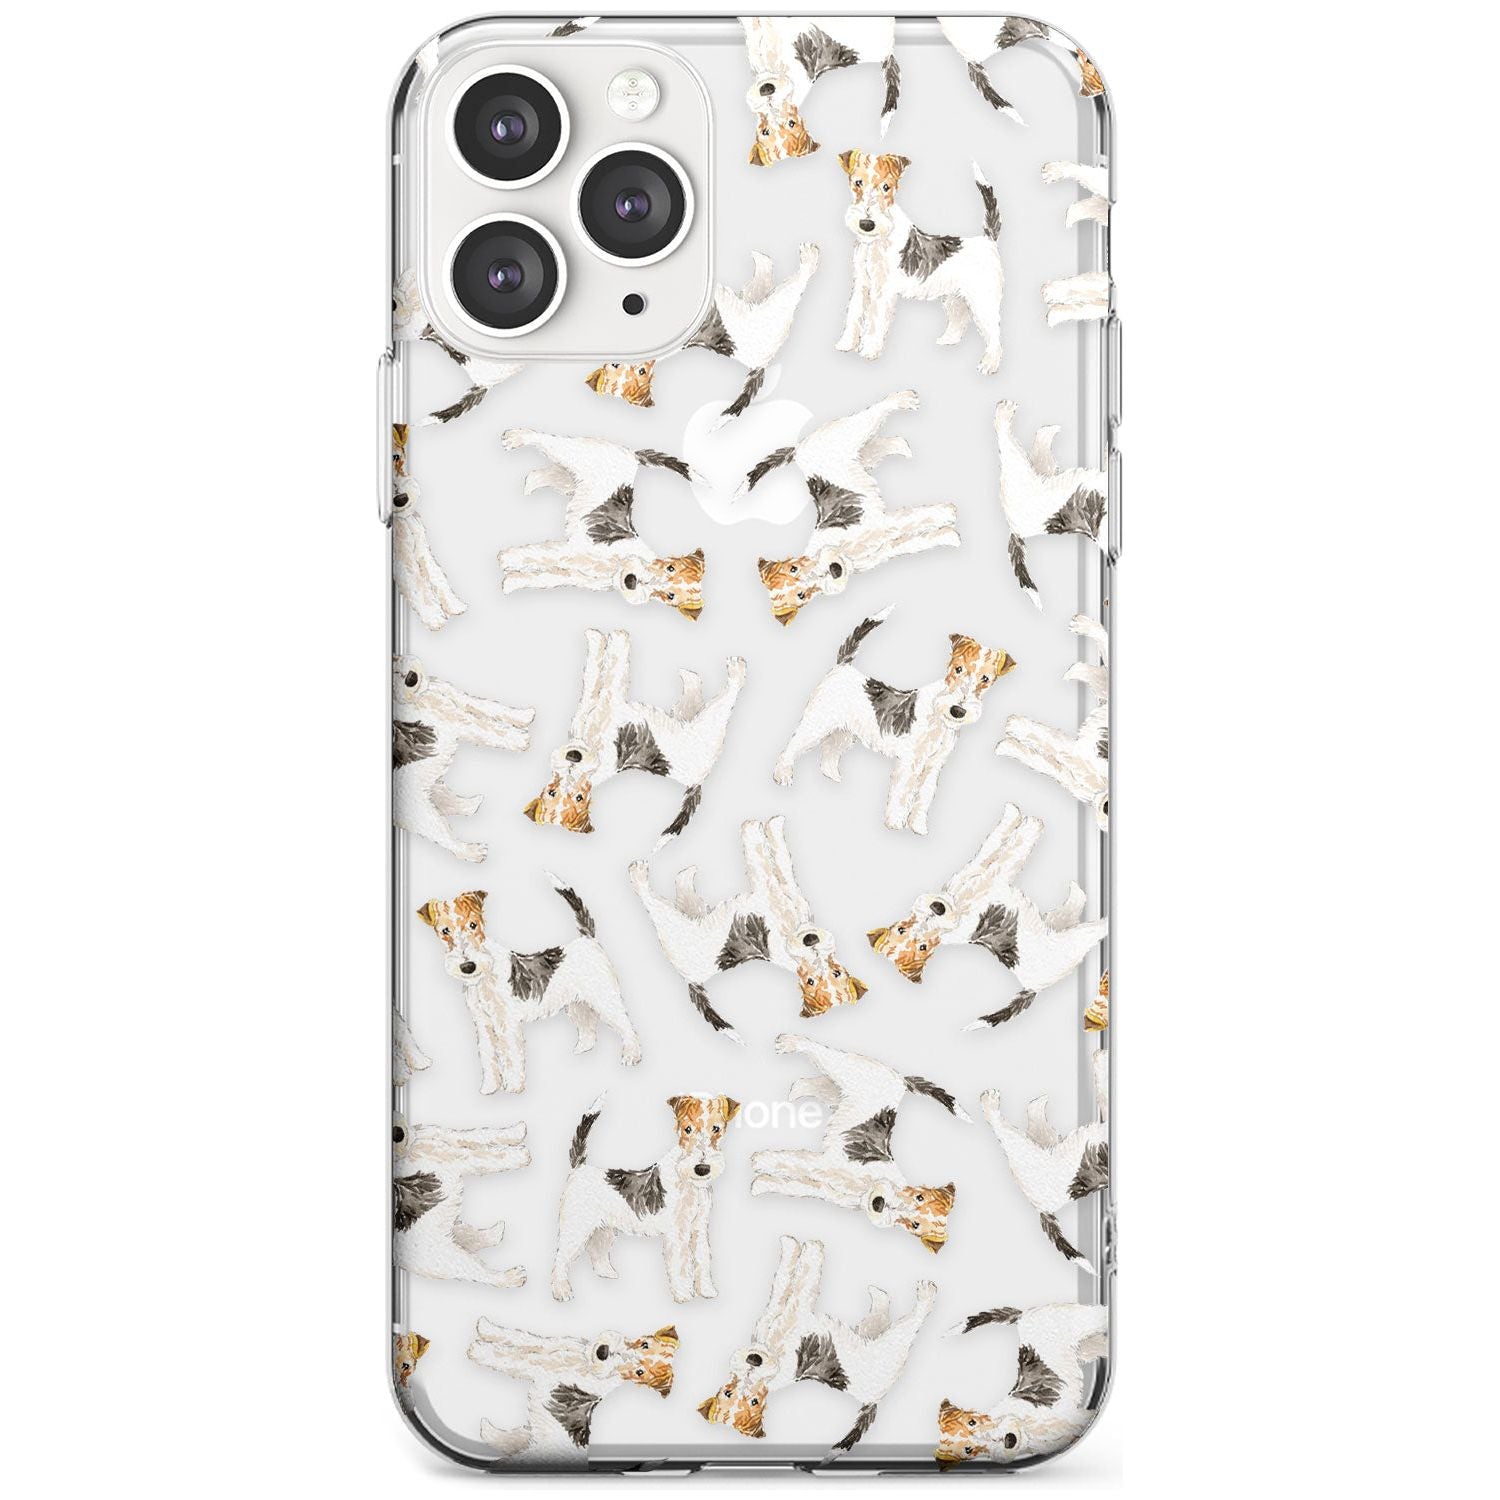 Wire Haired Fox Terrier Watercolour Dog Pattern Slim TPU Phone Case for iPhone 11 Pro Max